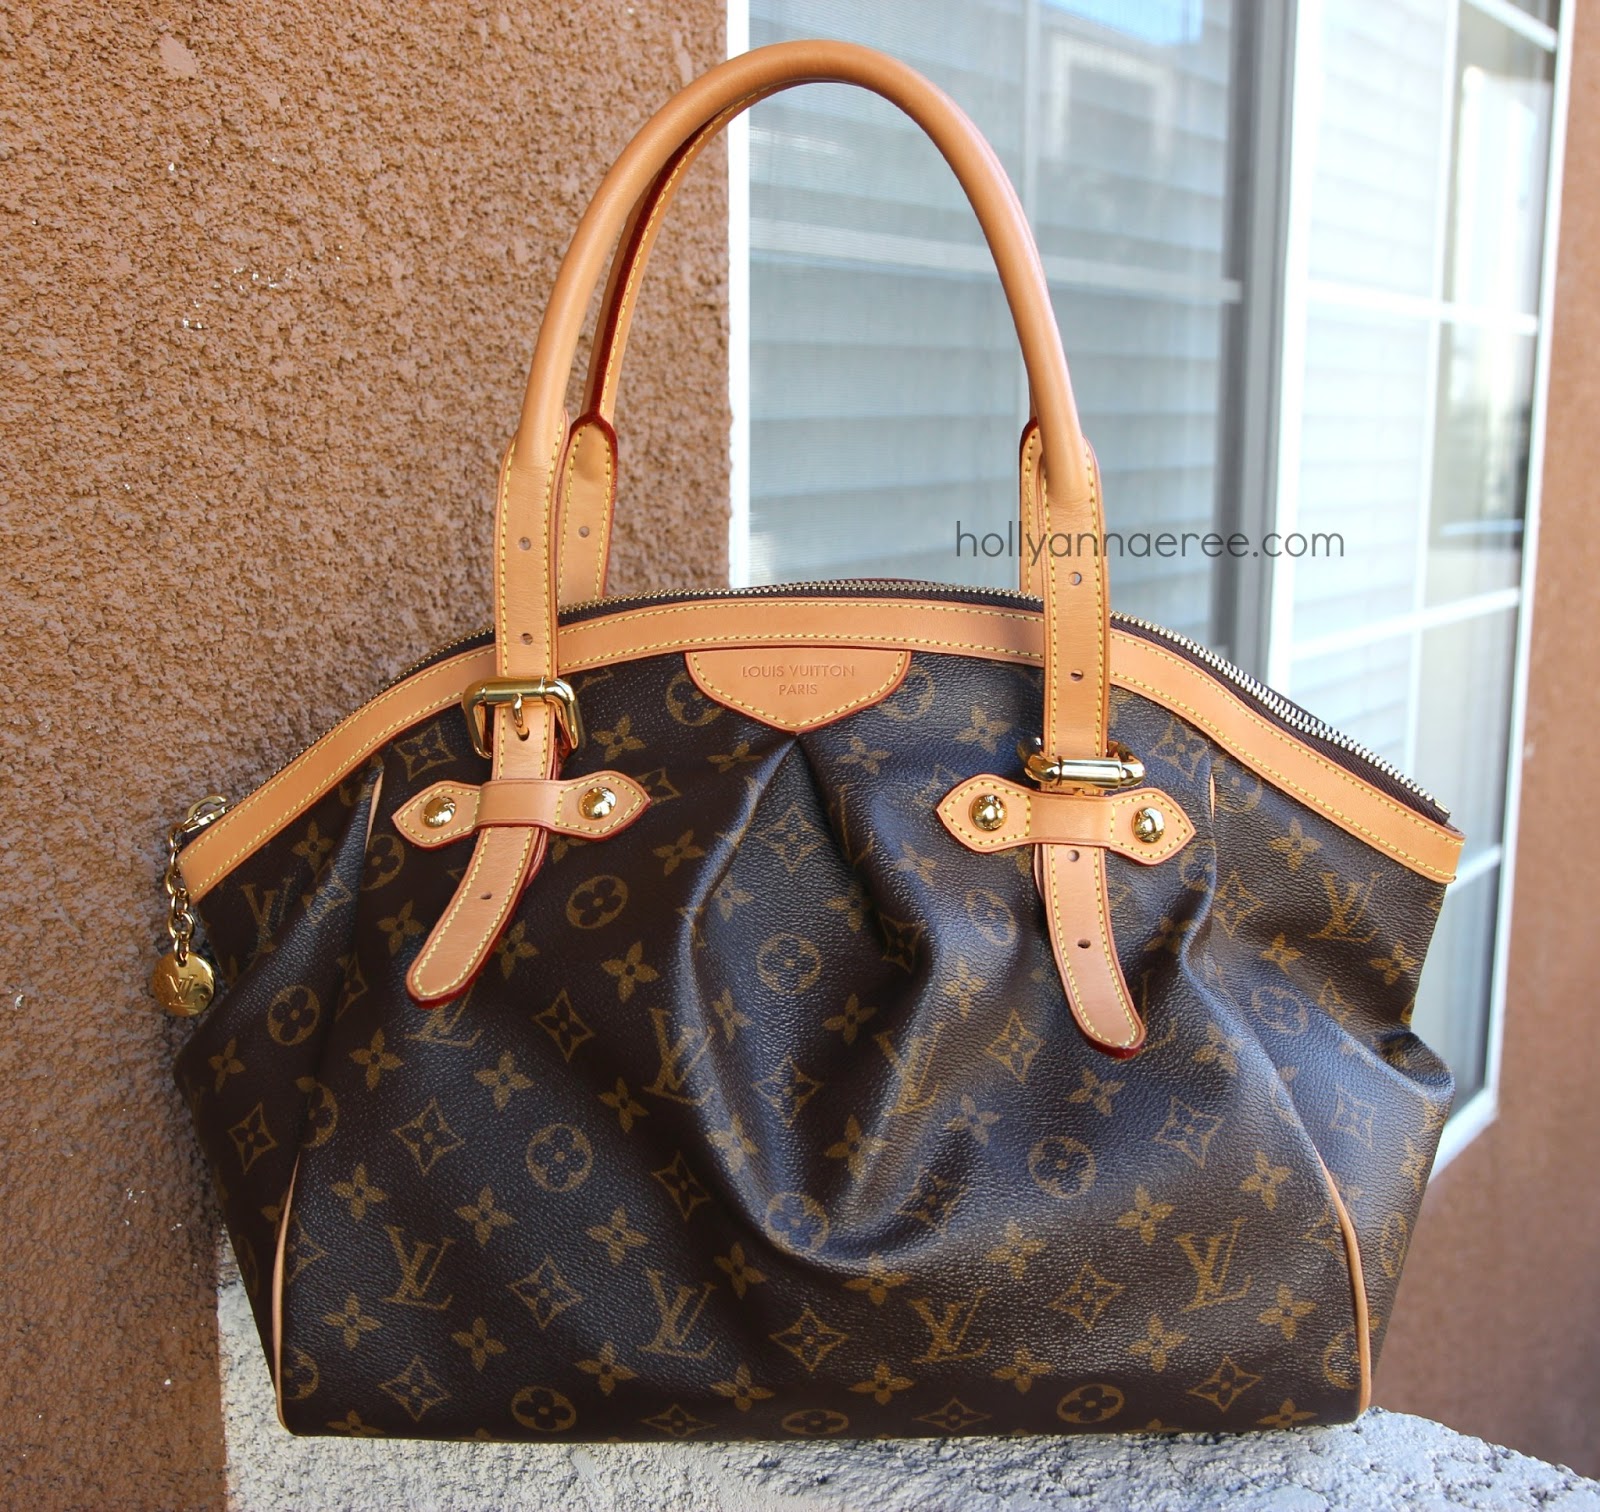 Holly Ann-AeRee 2.0: Mom's Well Loved Louis Vuitton Tivoli PM - FOR SALE